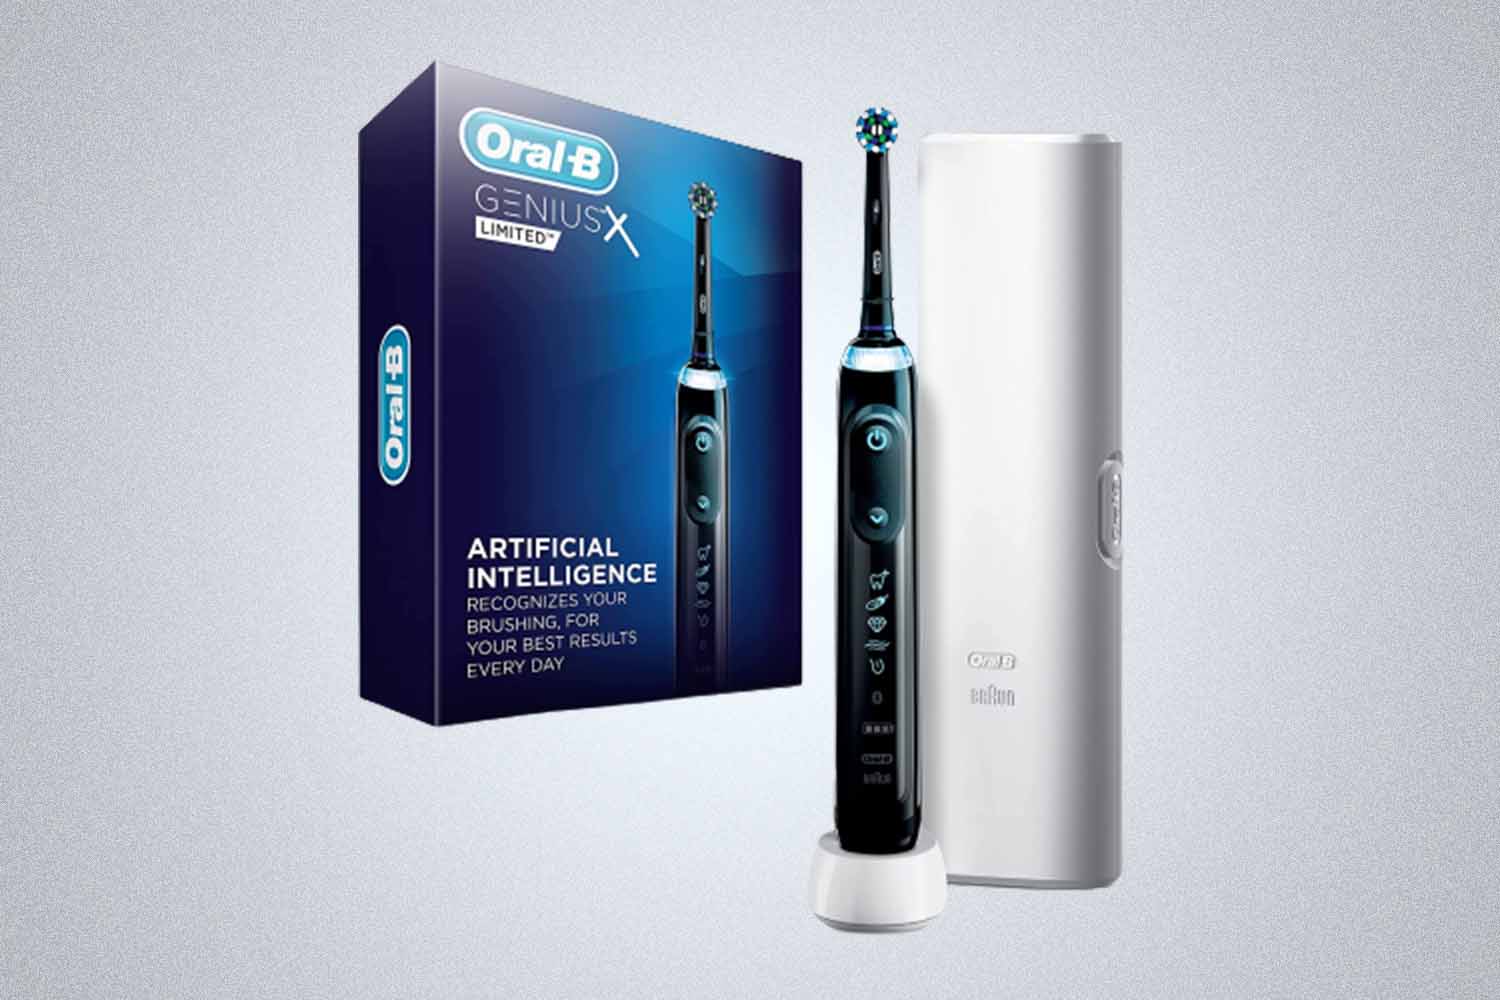 Oral-B Genius X Limited, Electric Toothbrush